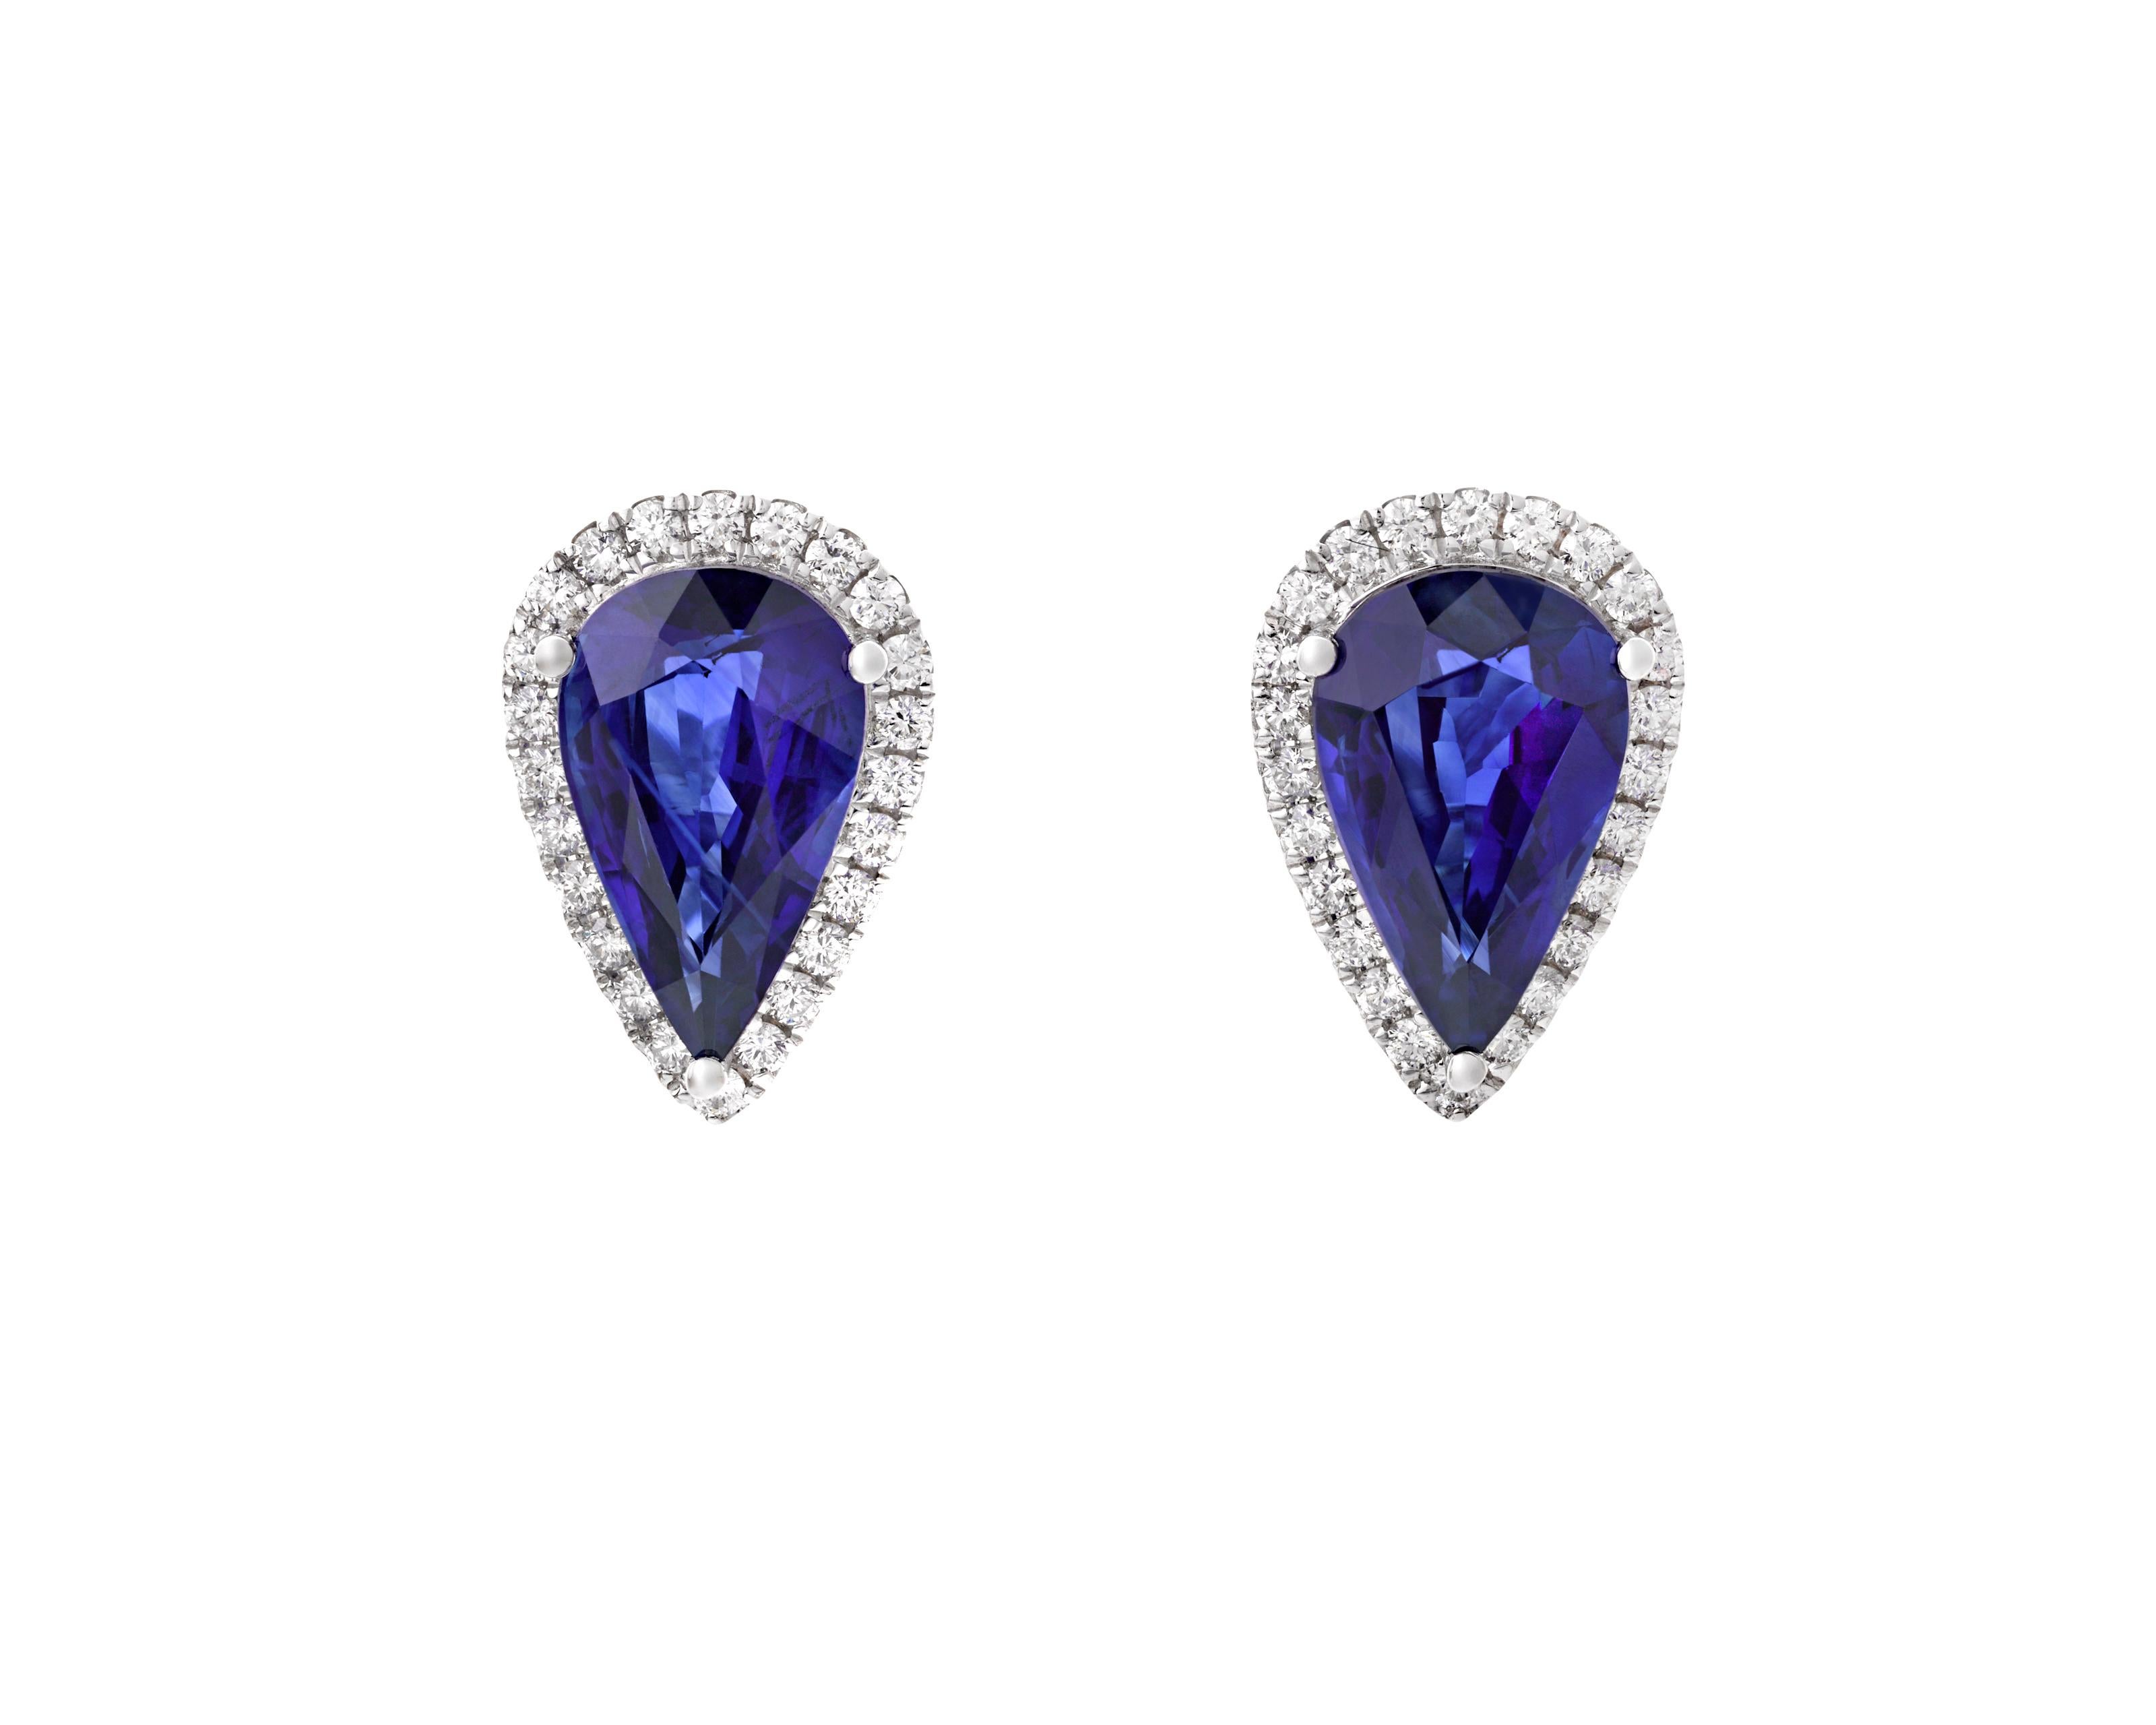 Two stunning sapphires weighing a combined 6.15 carats are set in these earrings. The pear-shaped gemstones are encircled by white diamonds totaling 0.47 carat in an 18K white gold setting. 